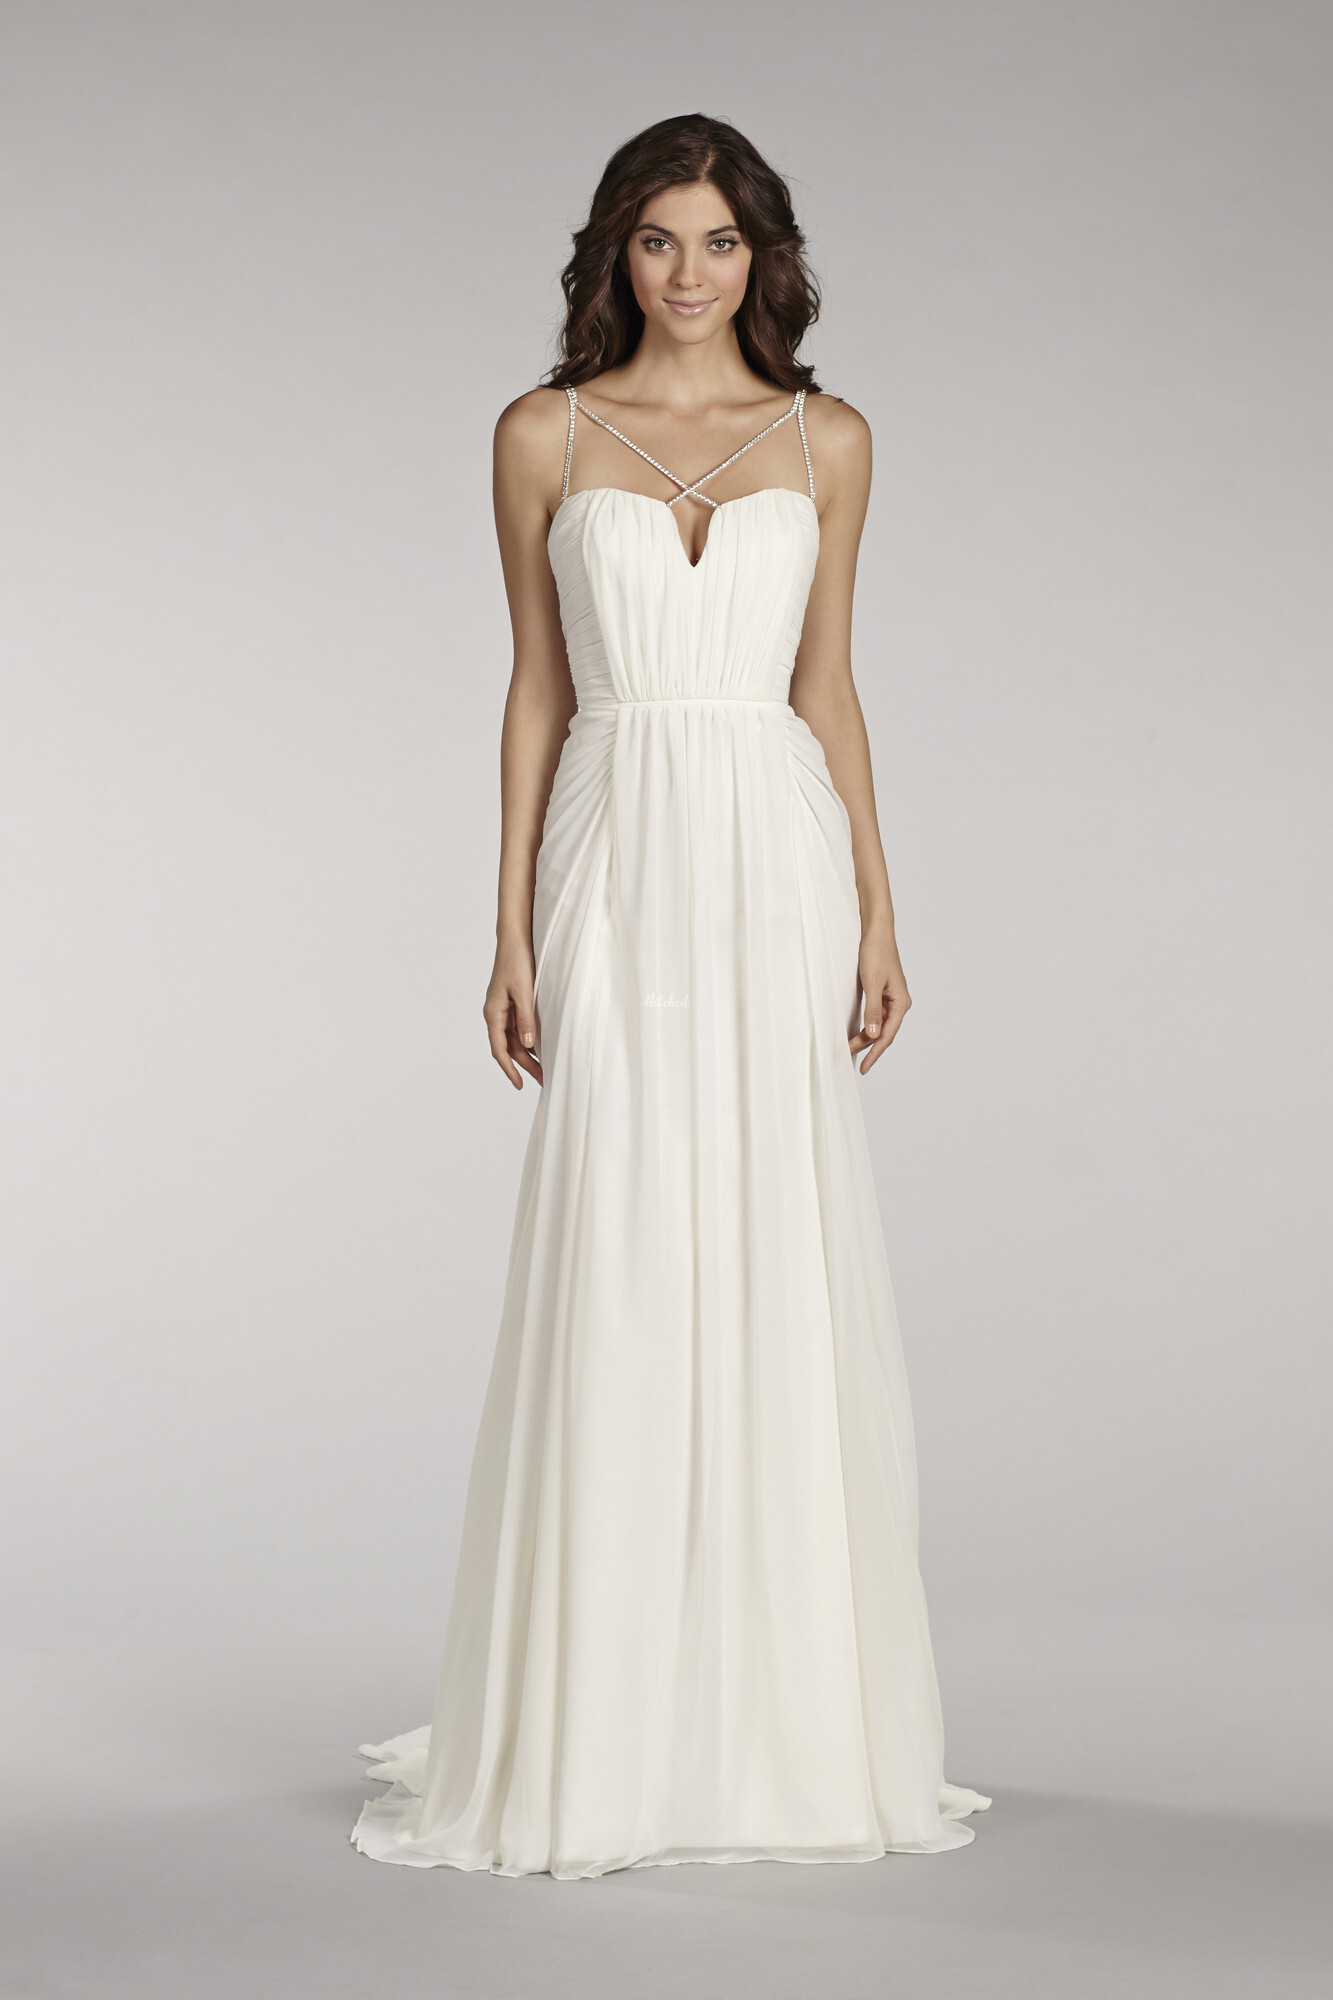 1400 Wedding Dress from Blush by Hayley Paige - hitched.co.uk